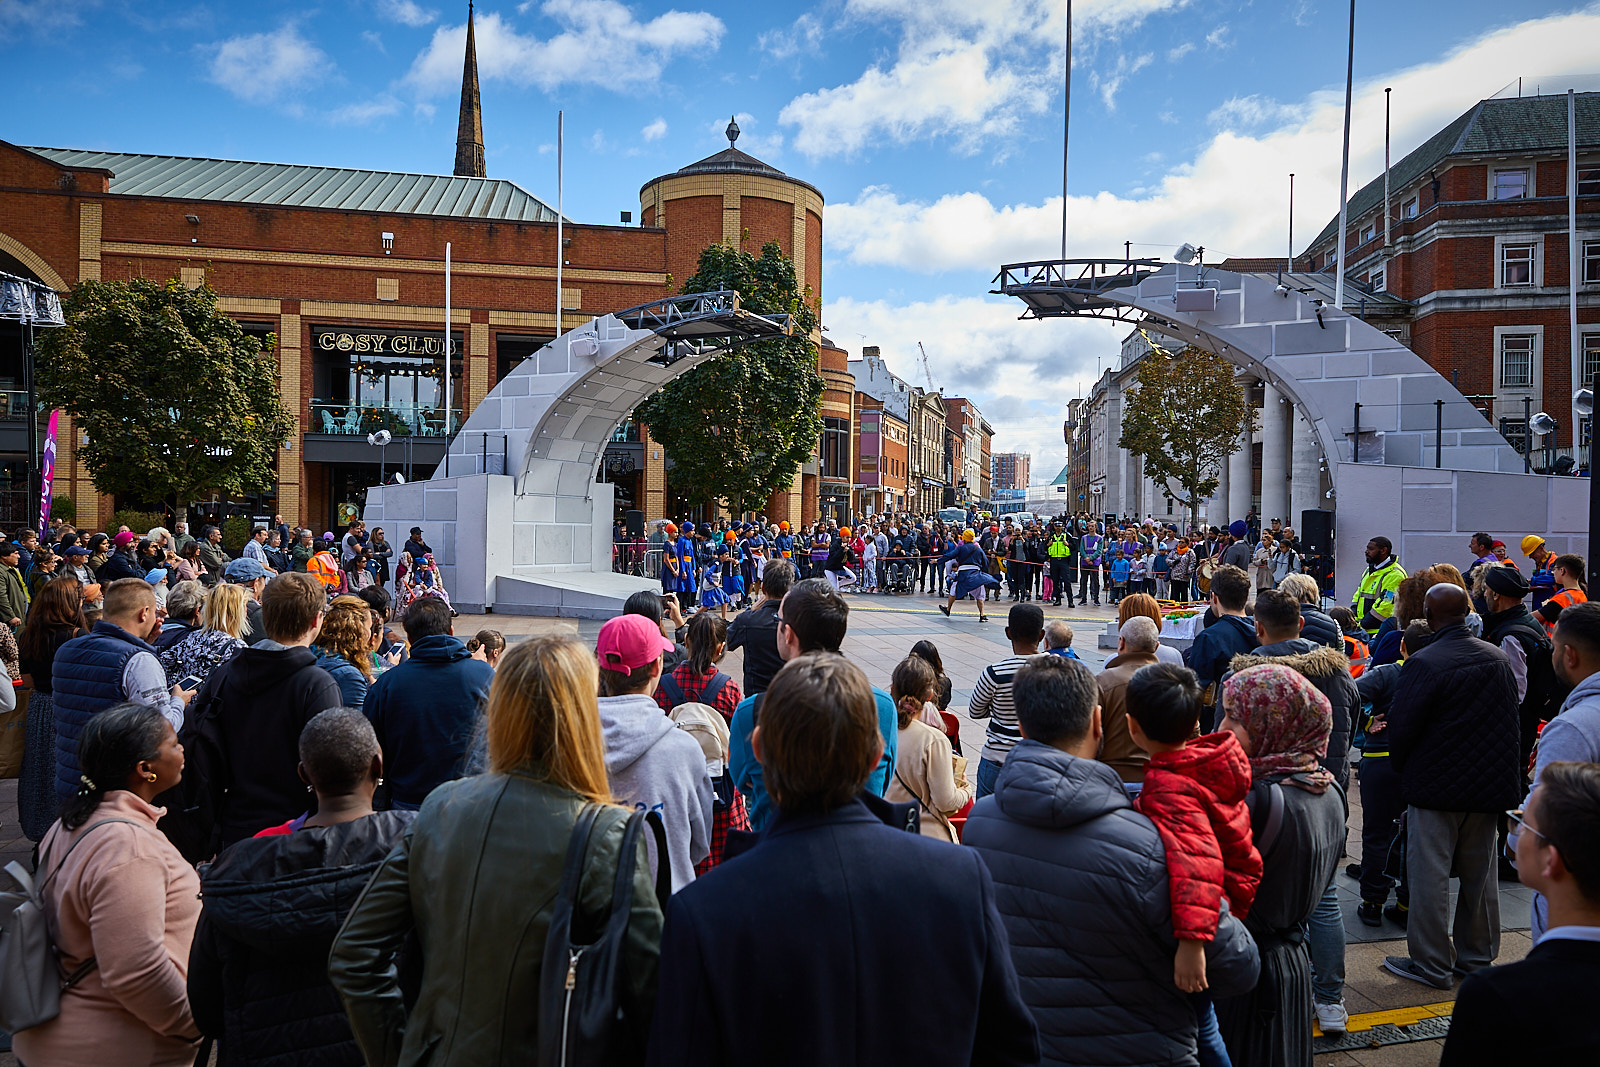 A broken bridge is in a busy city-centre square. It is surrounded by a crowd of onlookers. Below the bridge, Sikh dancers perform in blue costume with orange turbans.